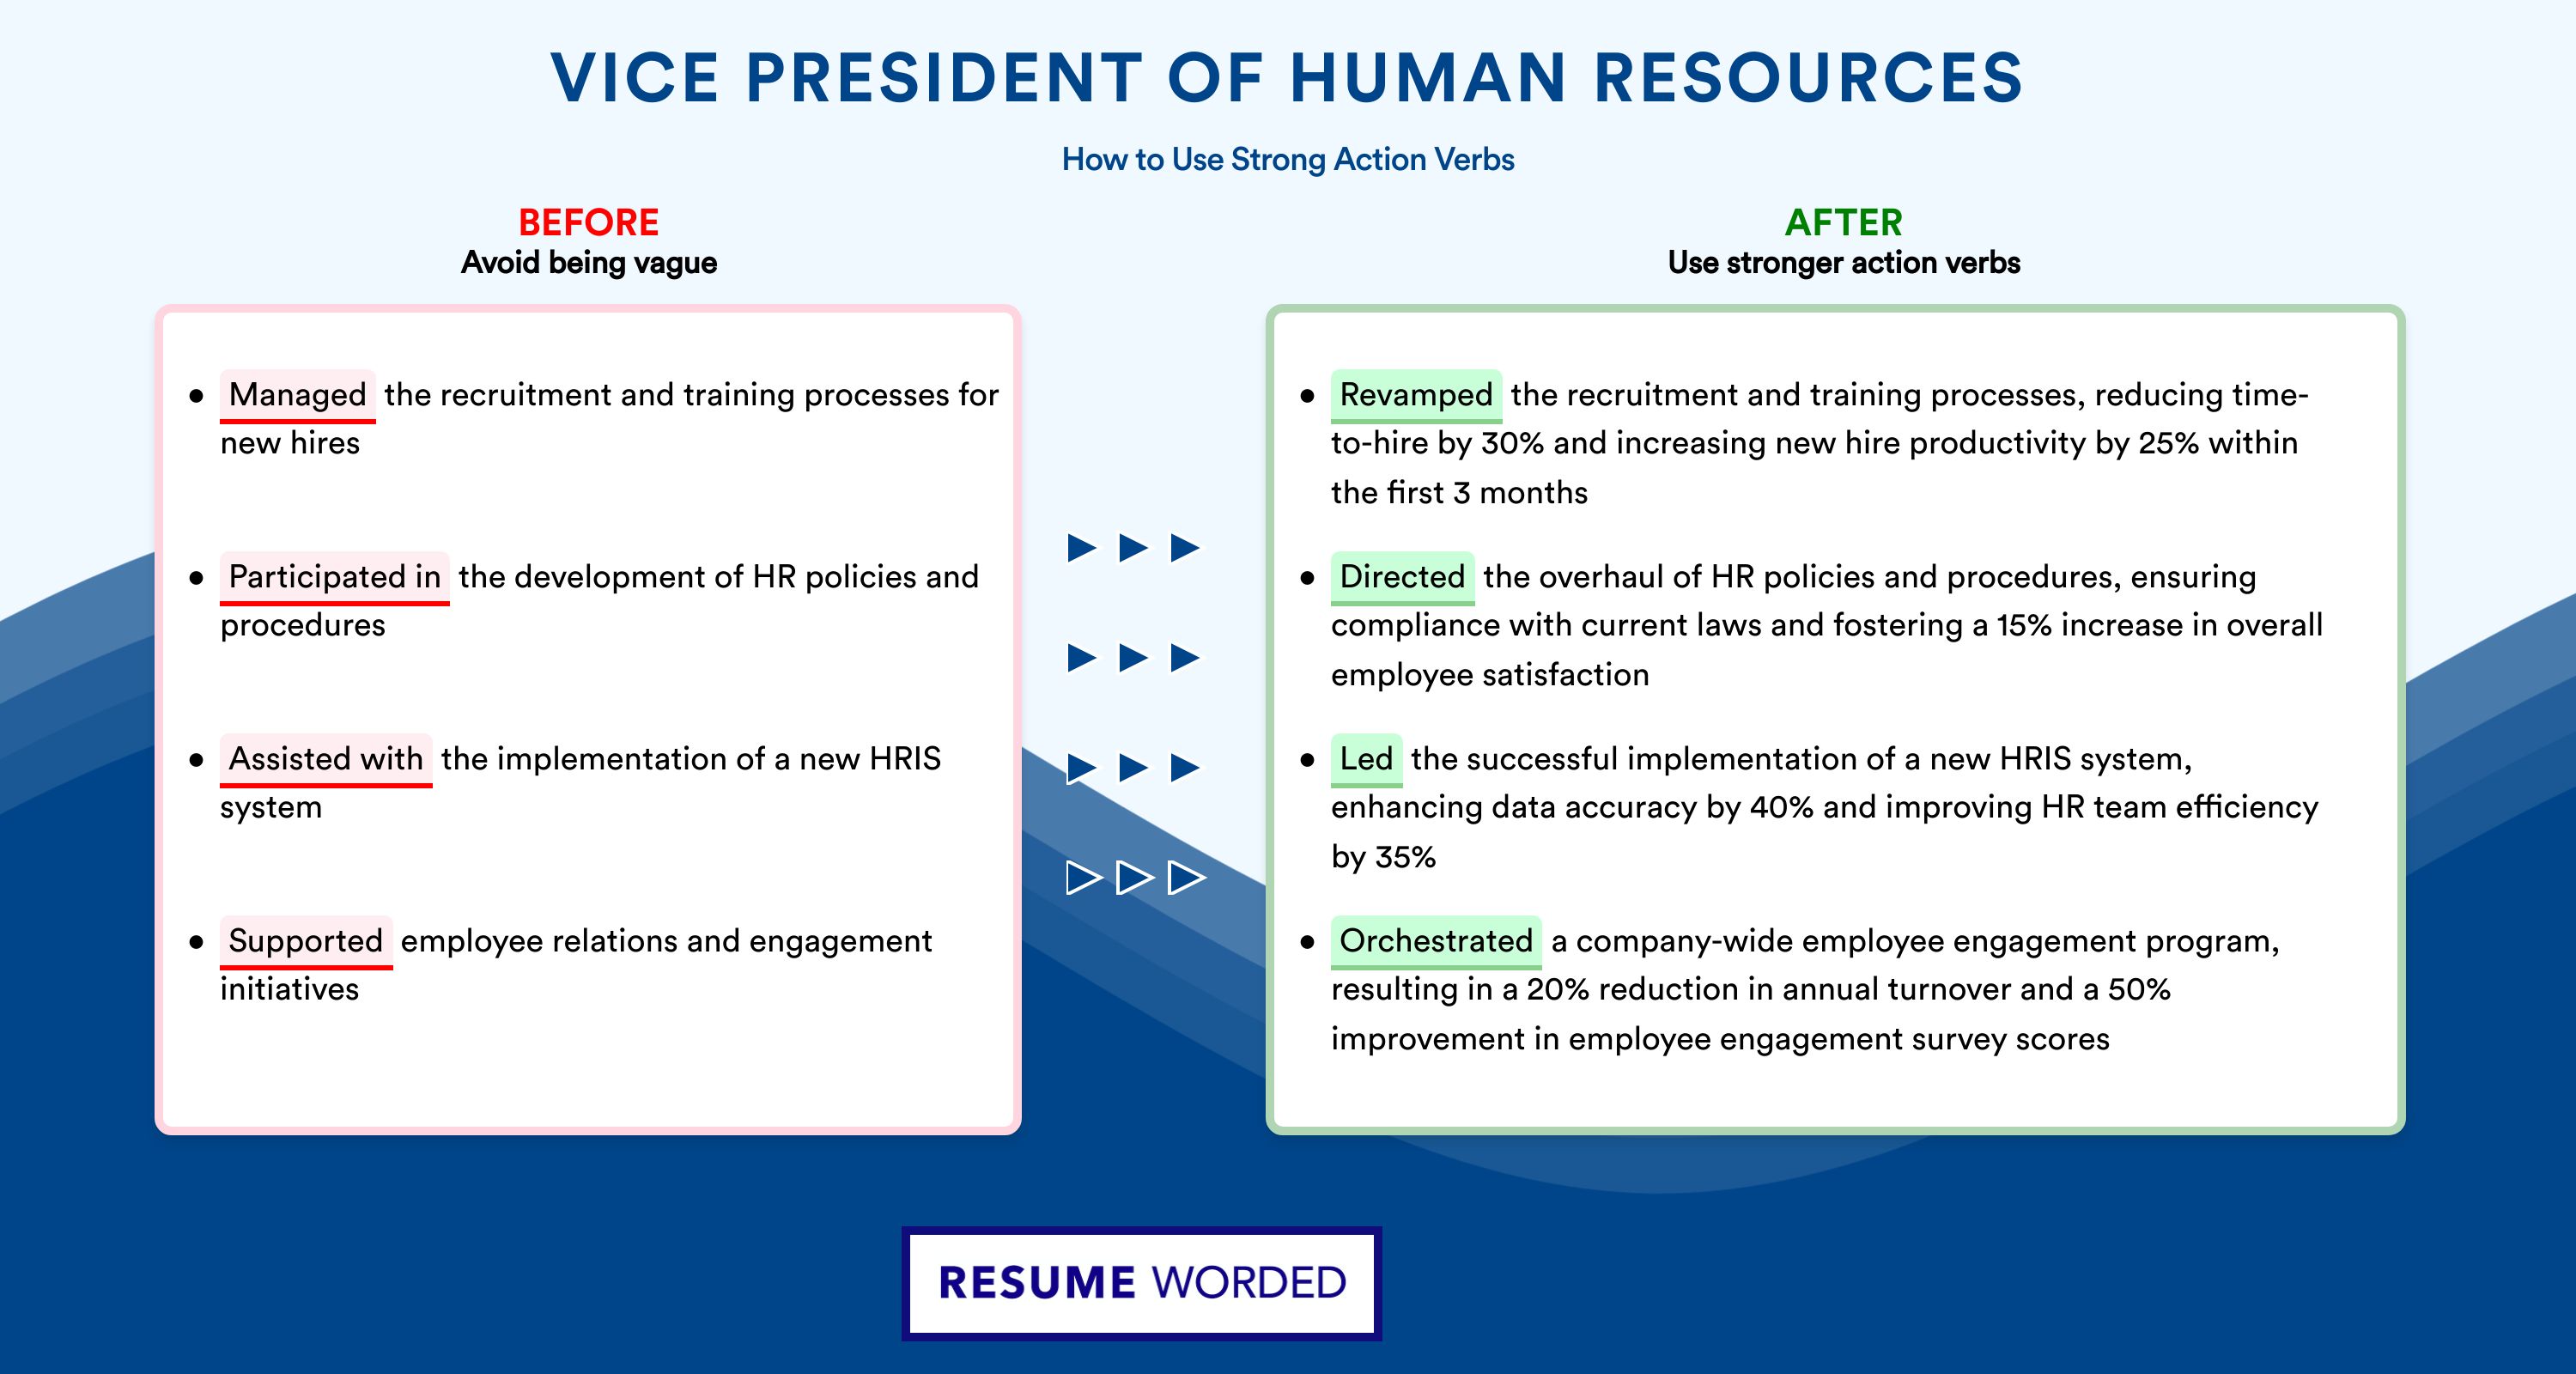 Action Verbs for Vice President of Human Resources